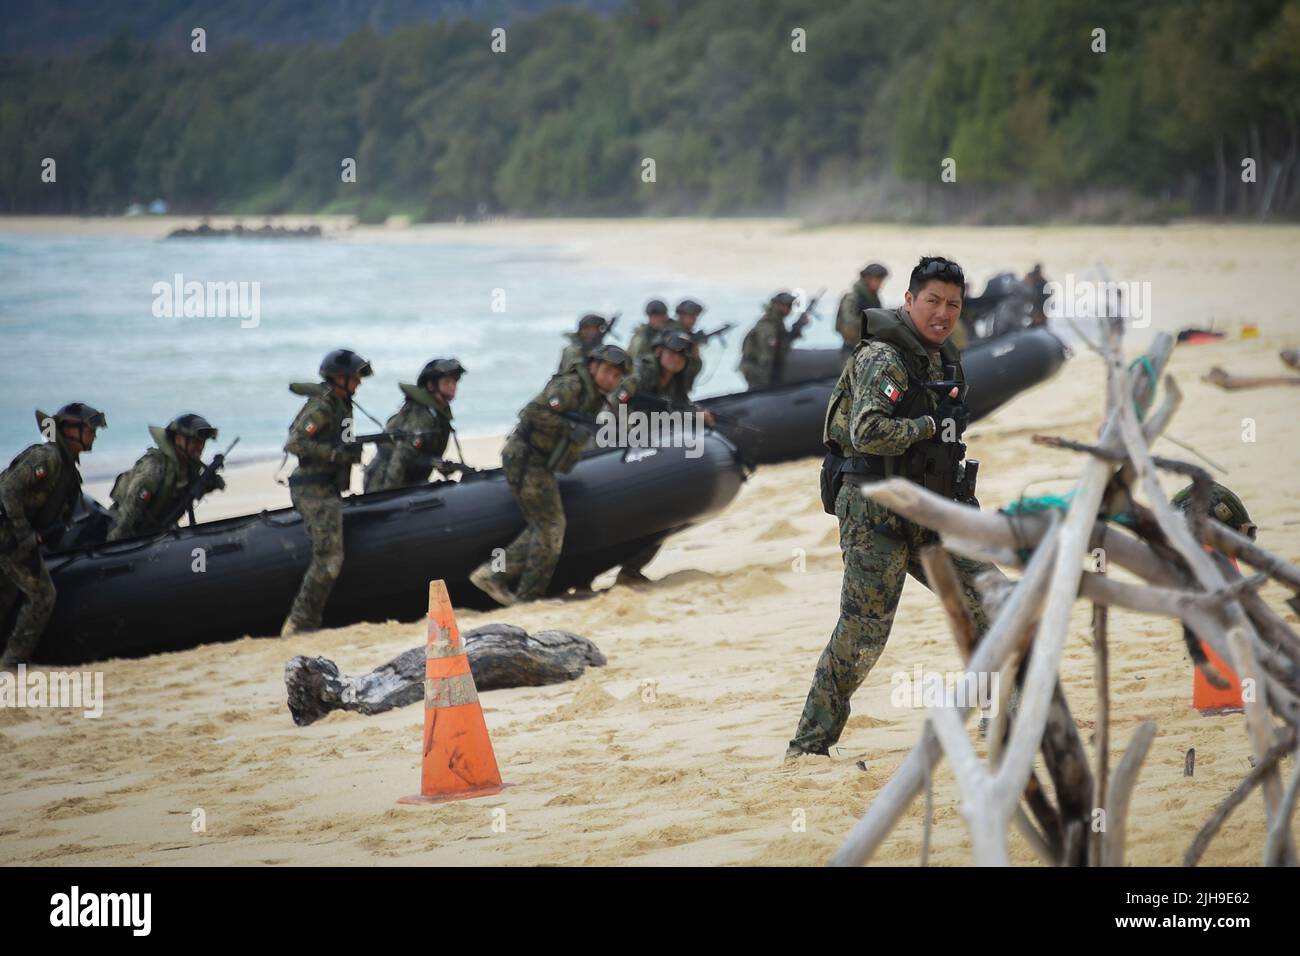 220715-N-EE352-1226  BELLOWS AIR FORCE STATION, Hawaii (July 15, 2022) Mexican Naval Infantry Capt. Isai Fernandez, assigned to Mexican Marine 8th Brigade, directs his team next to combat rubber raiding crafts during an amphibious operations training with the U.S. Marine Corps at Bellows Beach during Rim of the Pacific (RIMPAC) 2022. Twenty-six nations, 38 ships, four submarines, more than 170 aircraft and 25,000 personnel are participating in RIMPAC from June 29 to Aug. 4 in and around the Hawaiian Islands and Southern California. The world's largest international maritime exercise, RIMPAC pr Stock Photo